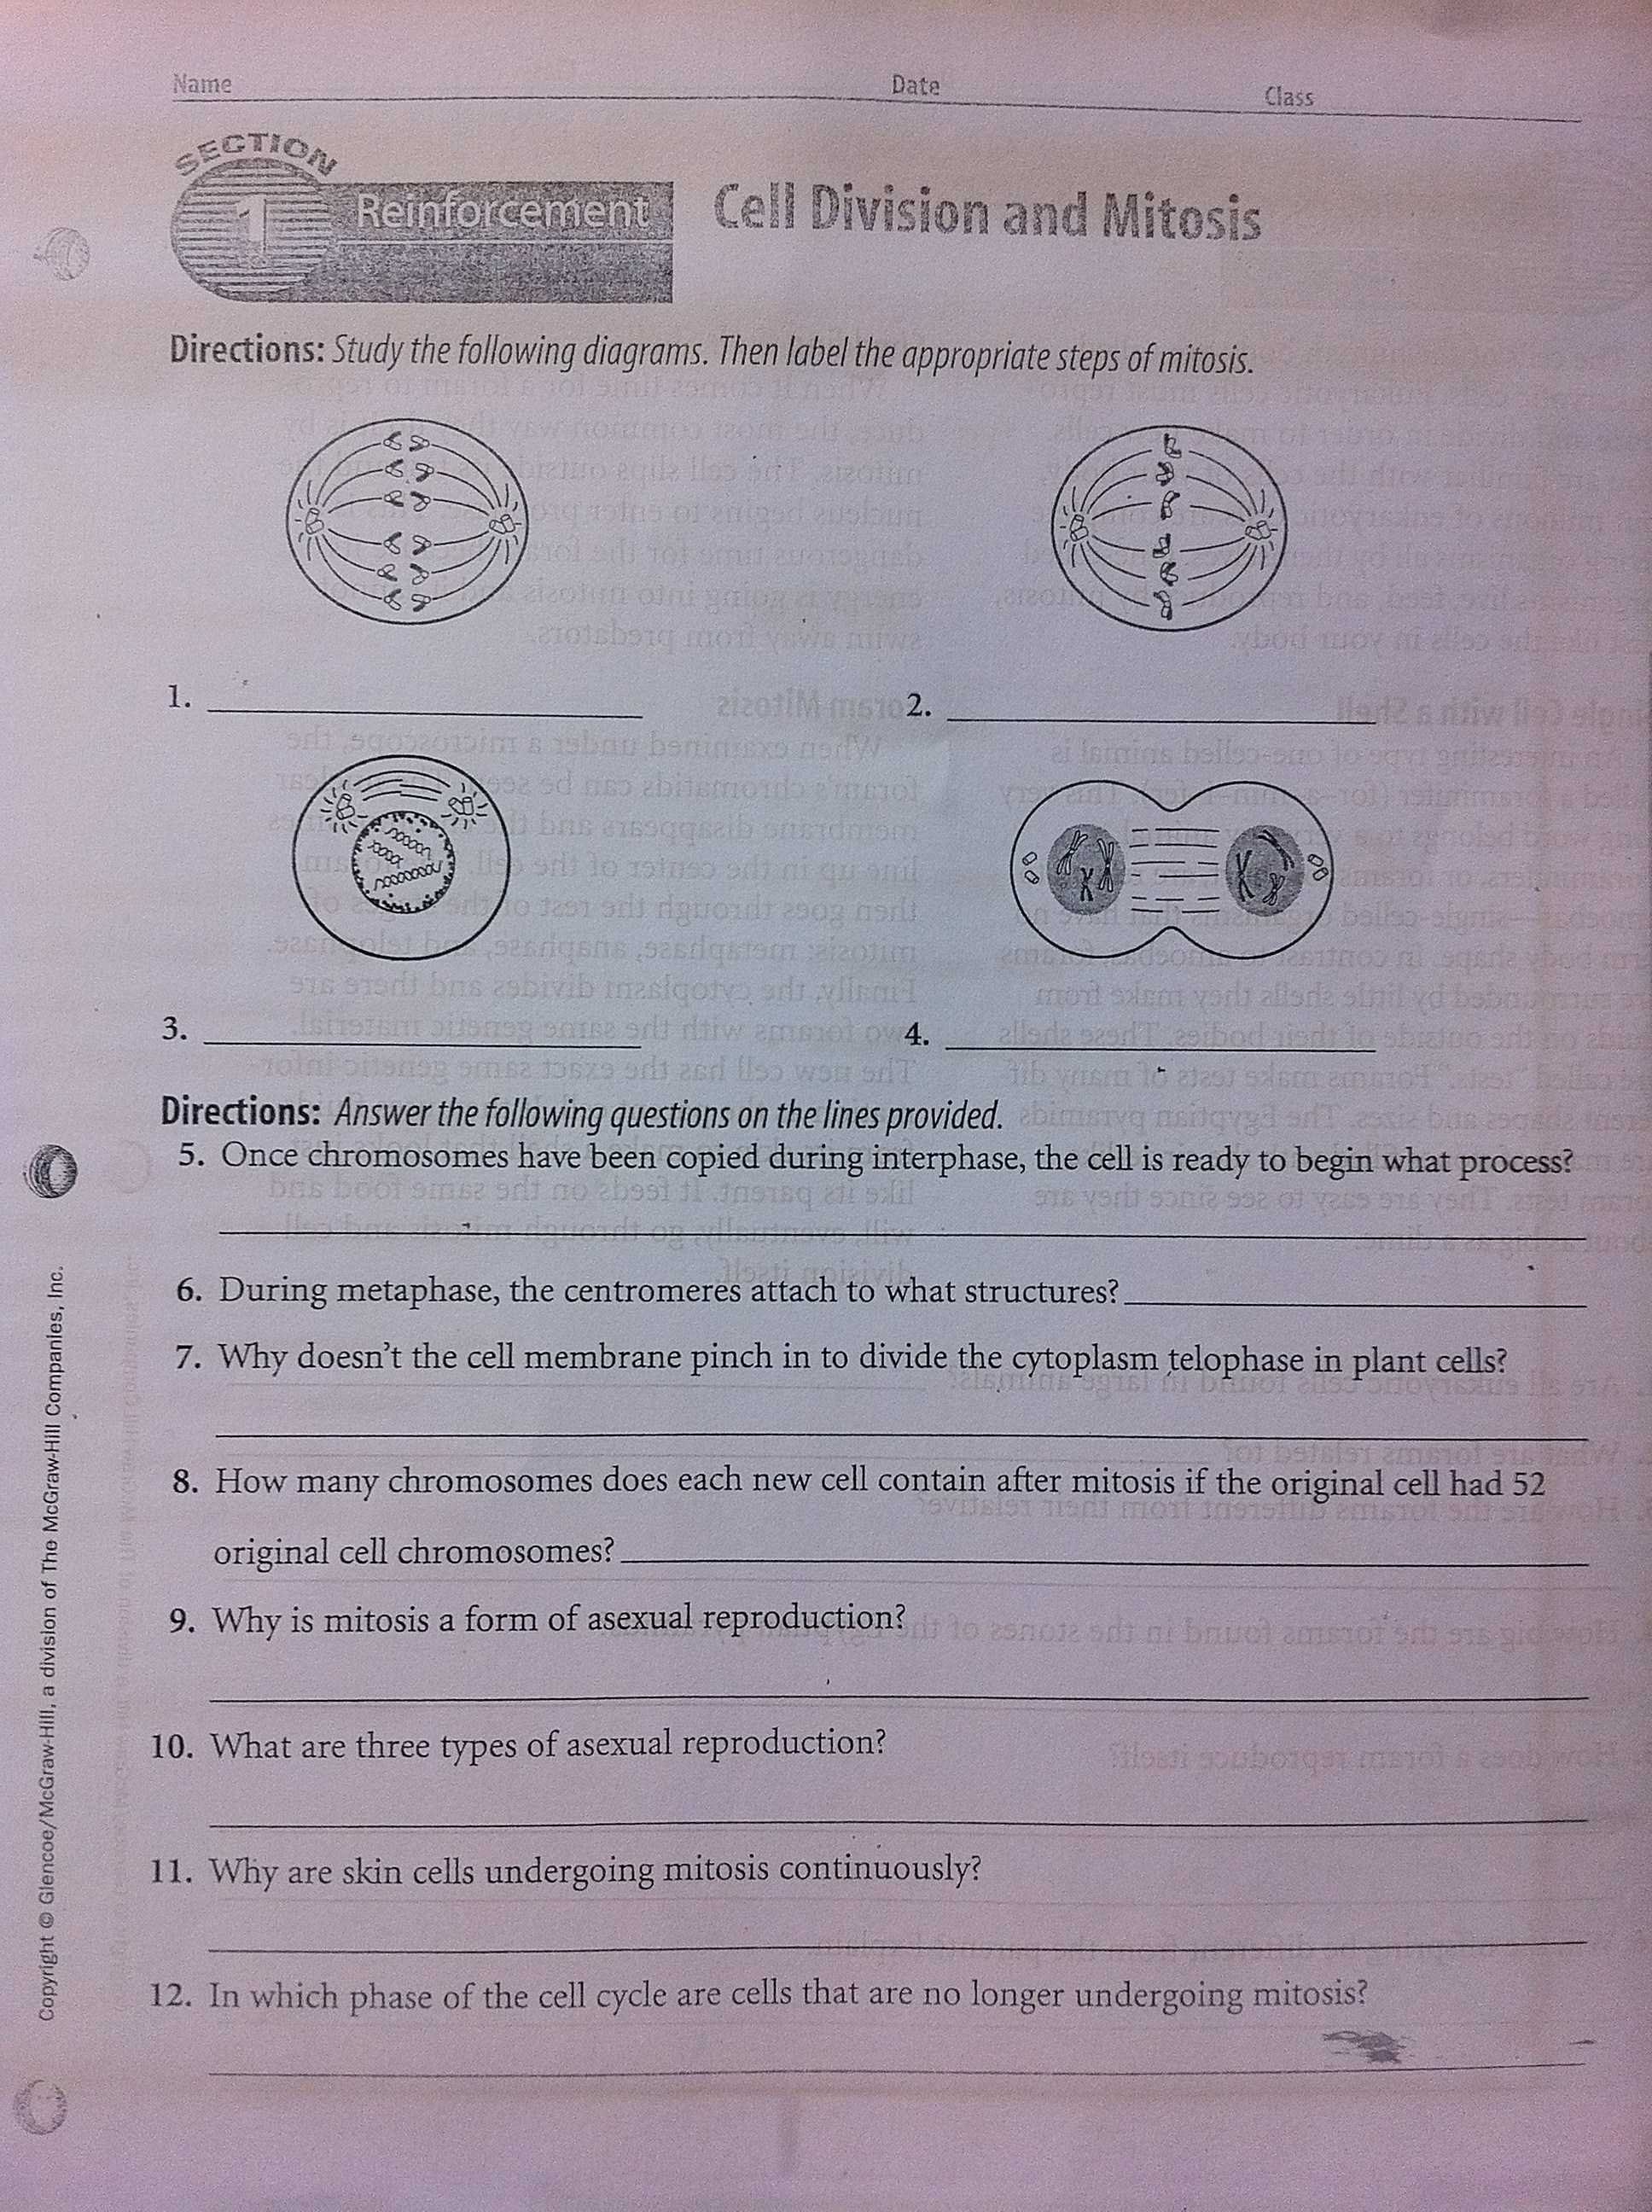 Cell Cycle Worksheet Answers Biology Along with Cellular Respirationword Puzzle Worksheet Answers Cell Reproduction